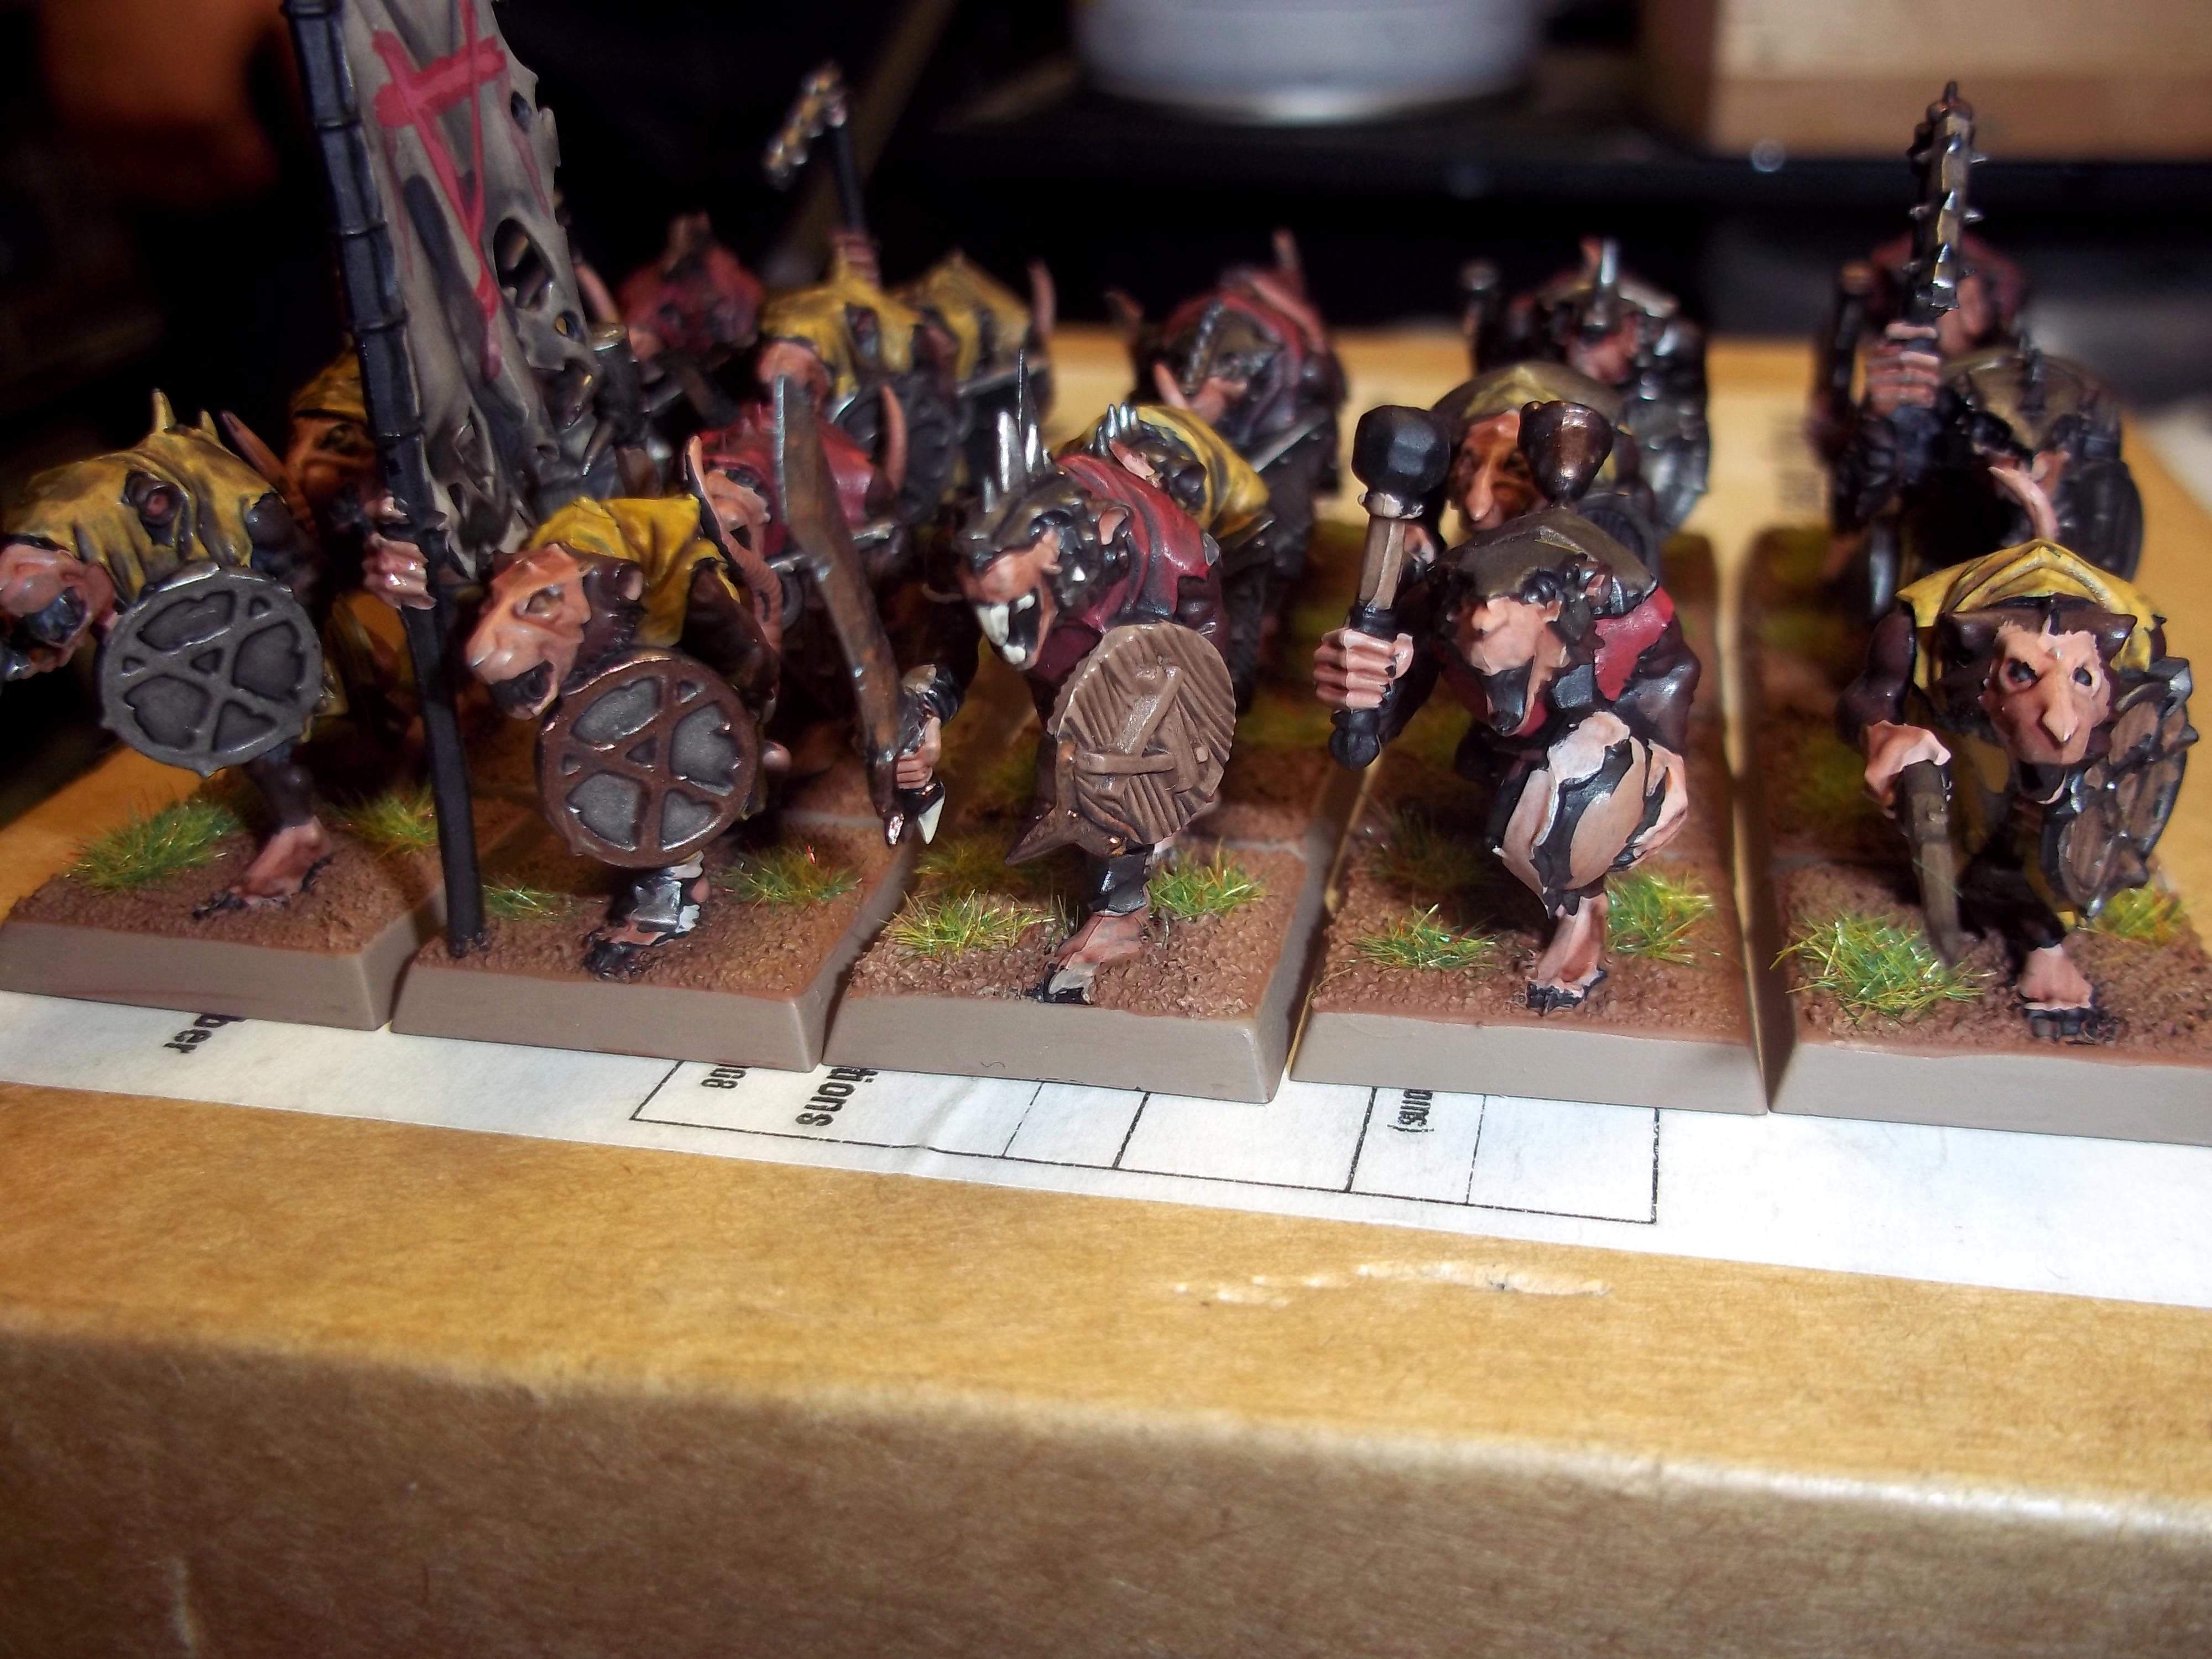 1st unit of IOB clanrats